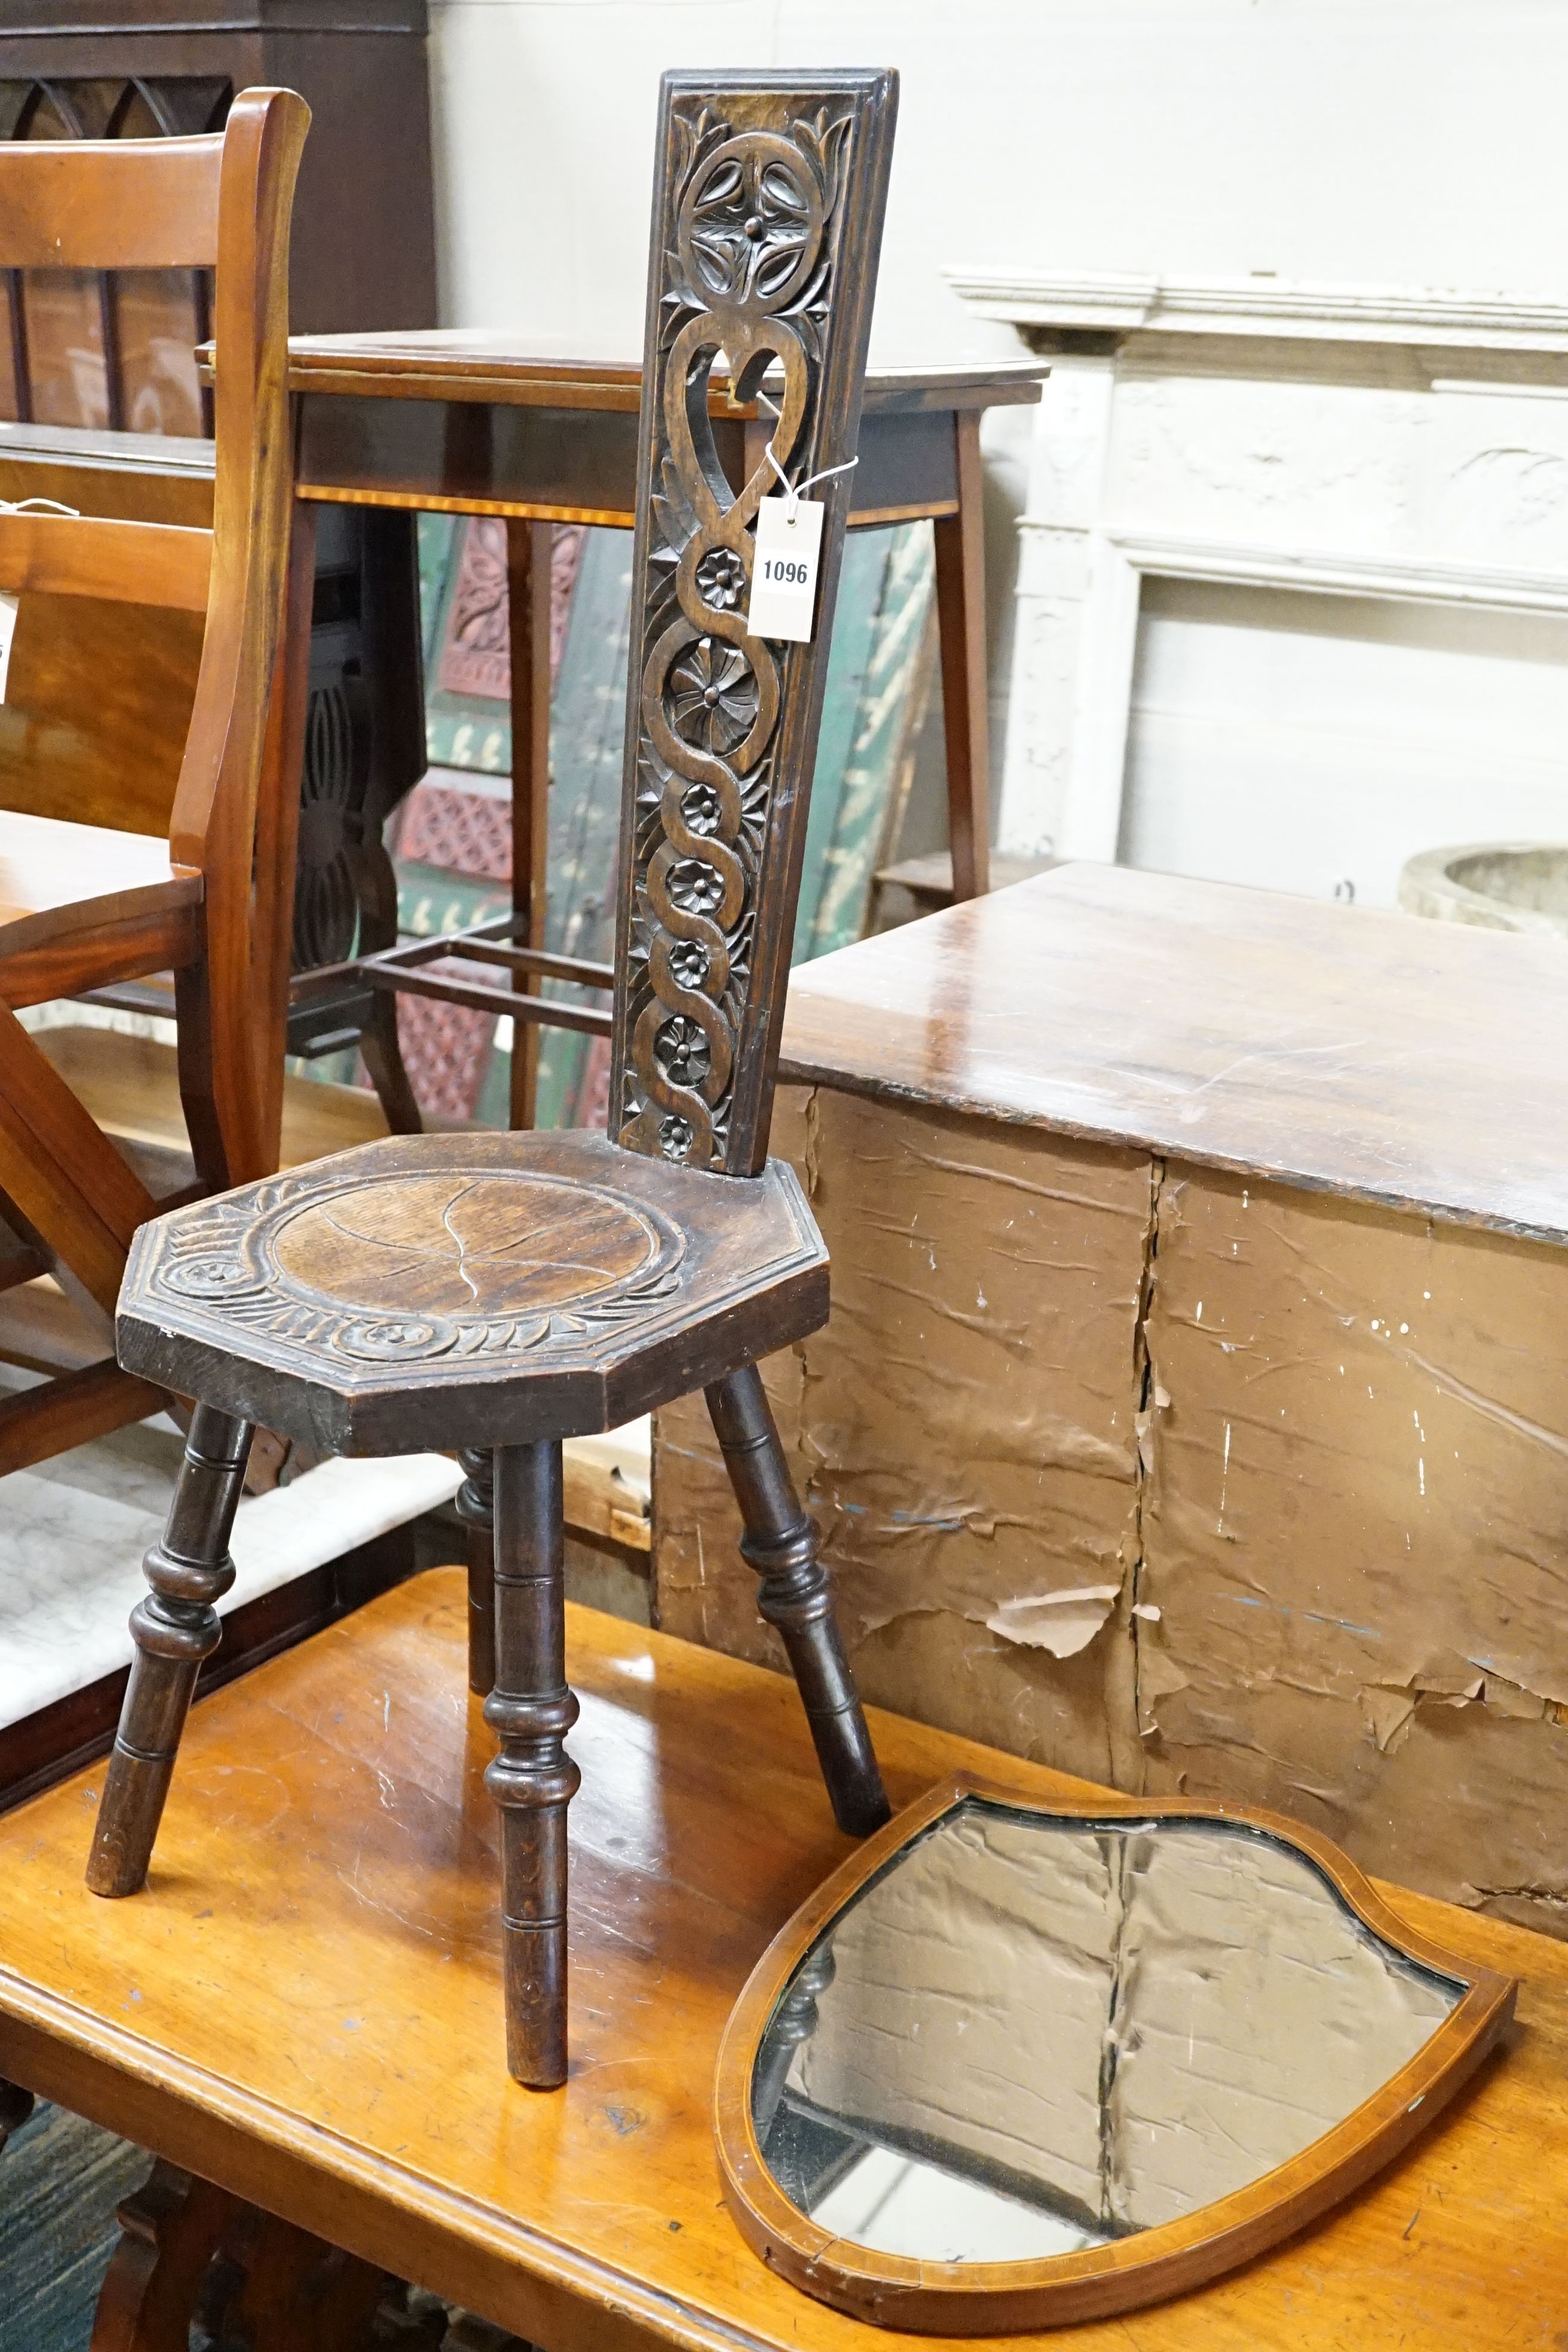 An Edwardian inlaid mirror and a carved stool.